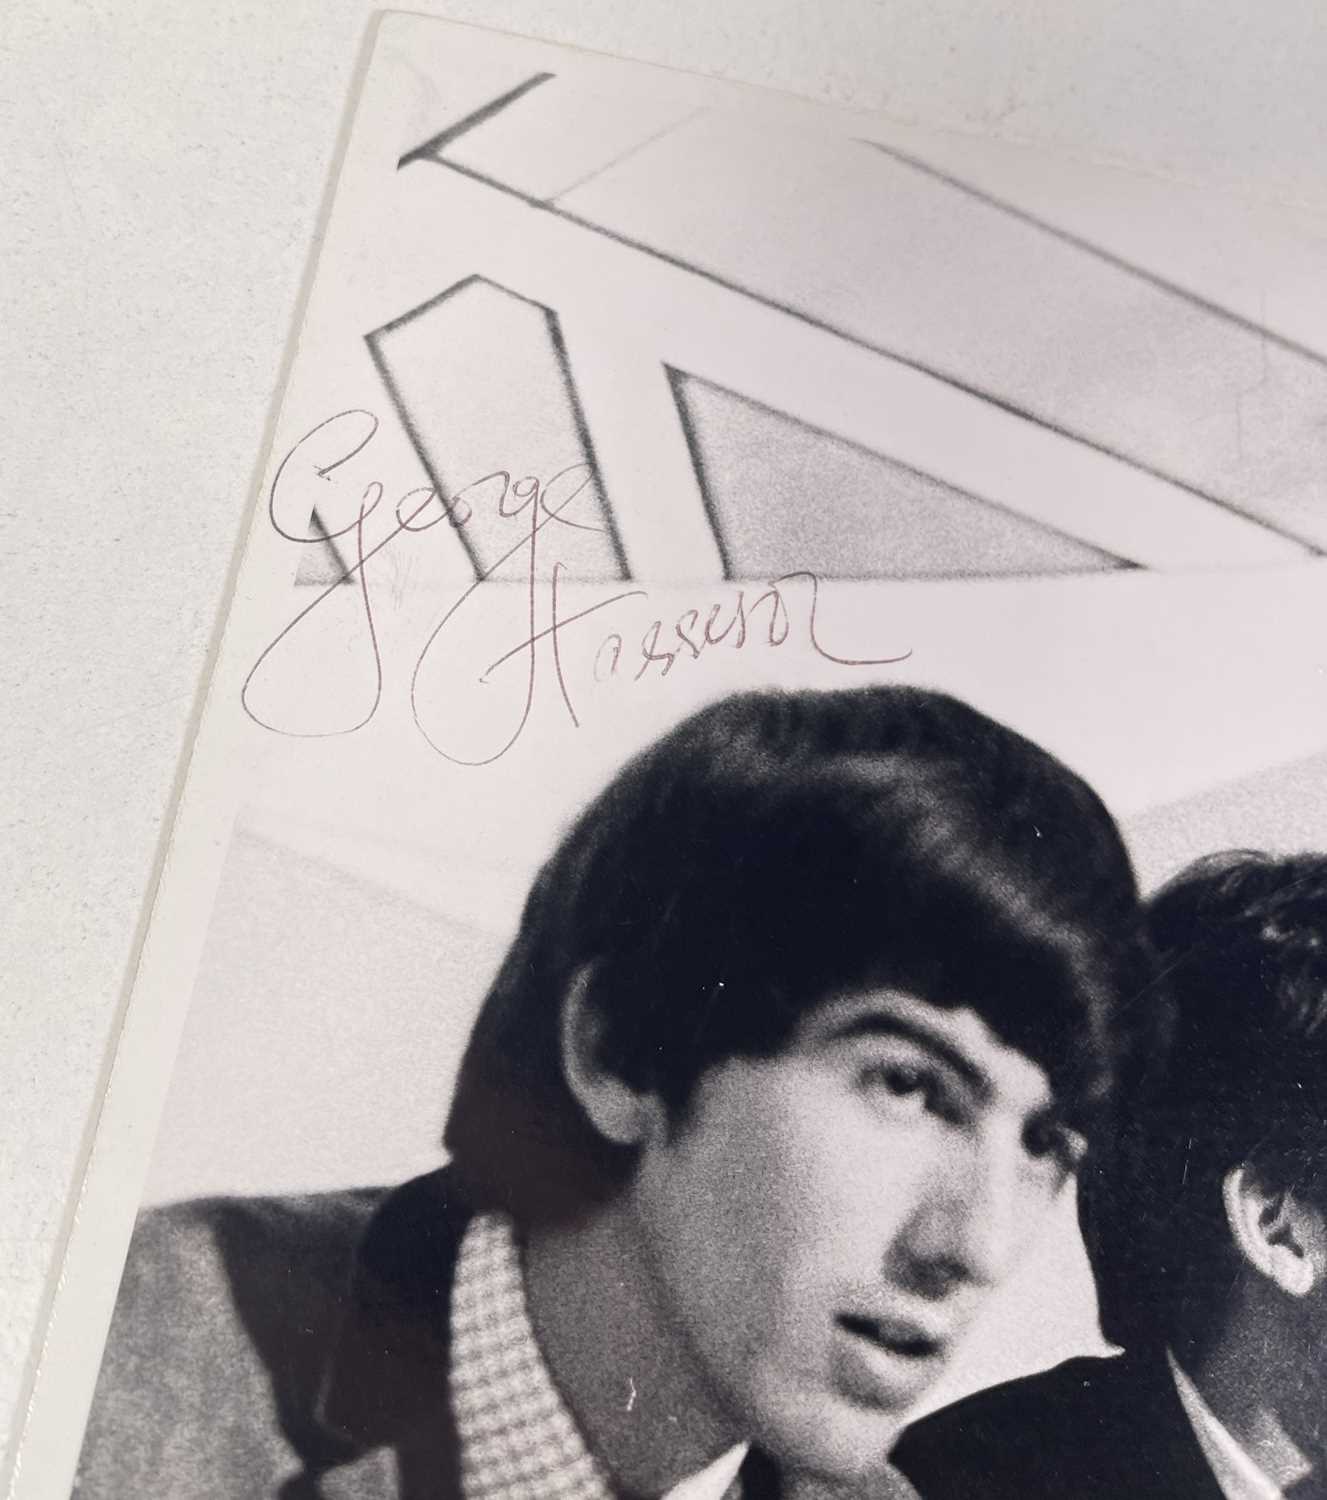 THE BEATLES FULLY SIGNED PHOTOGRAPH. - Image 3 of 8